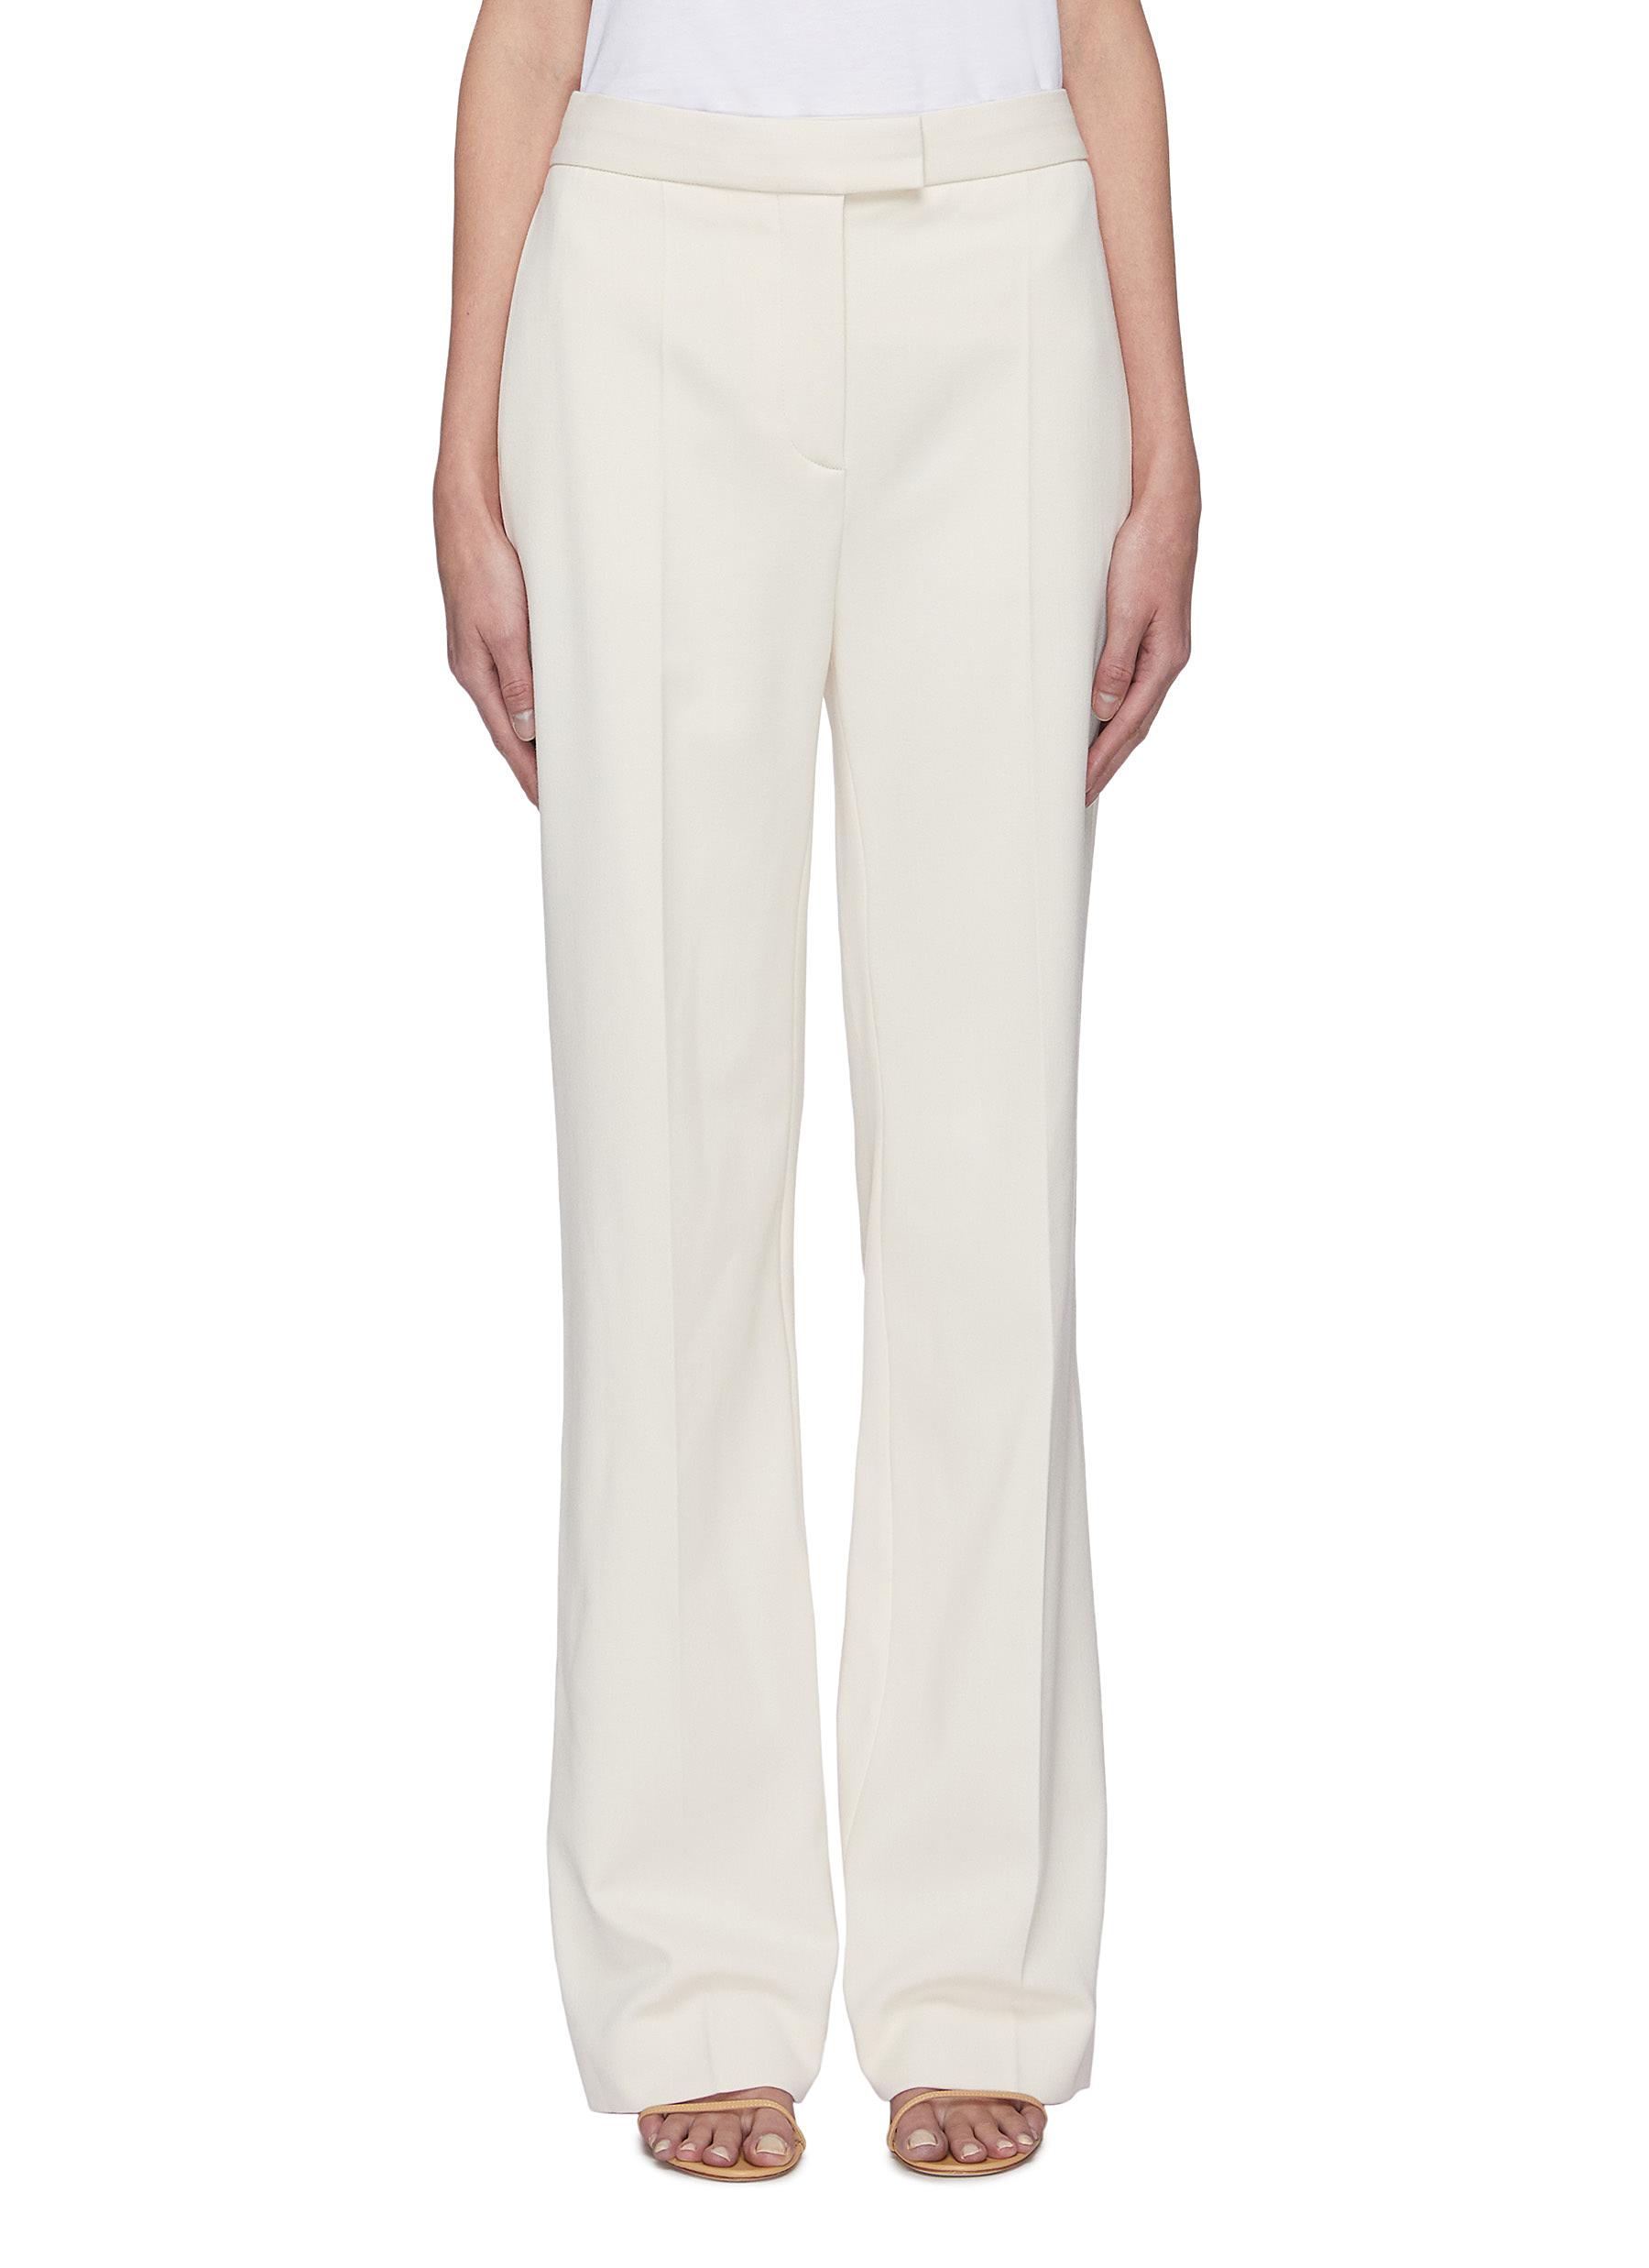 VICTORIA VICTORIA BECKHAM HIGH-WAISTED STRAIGHT LEG SUITING PANTS